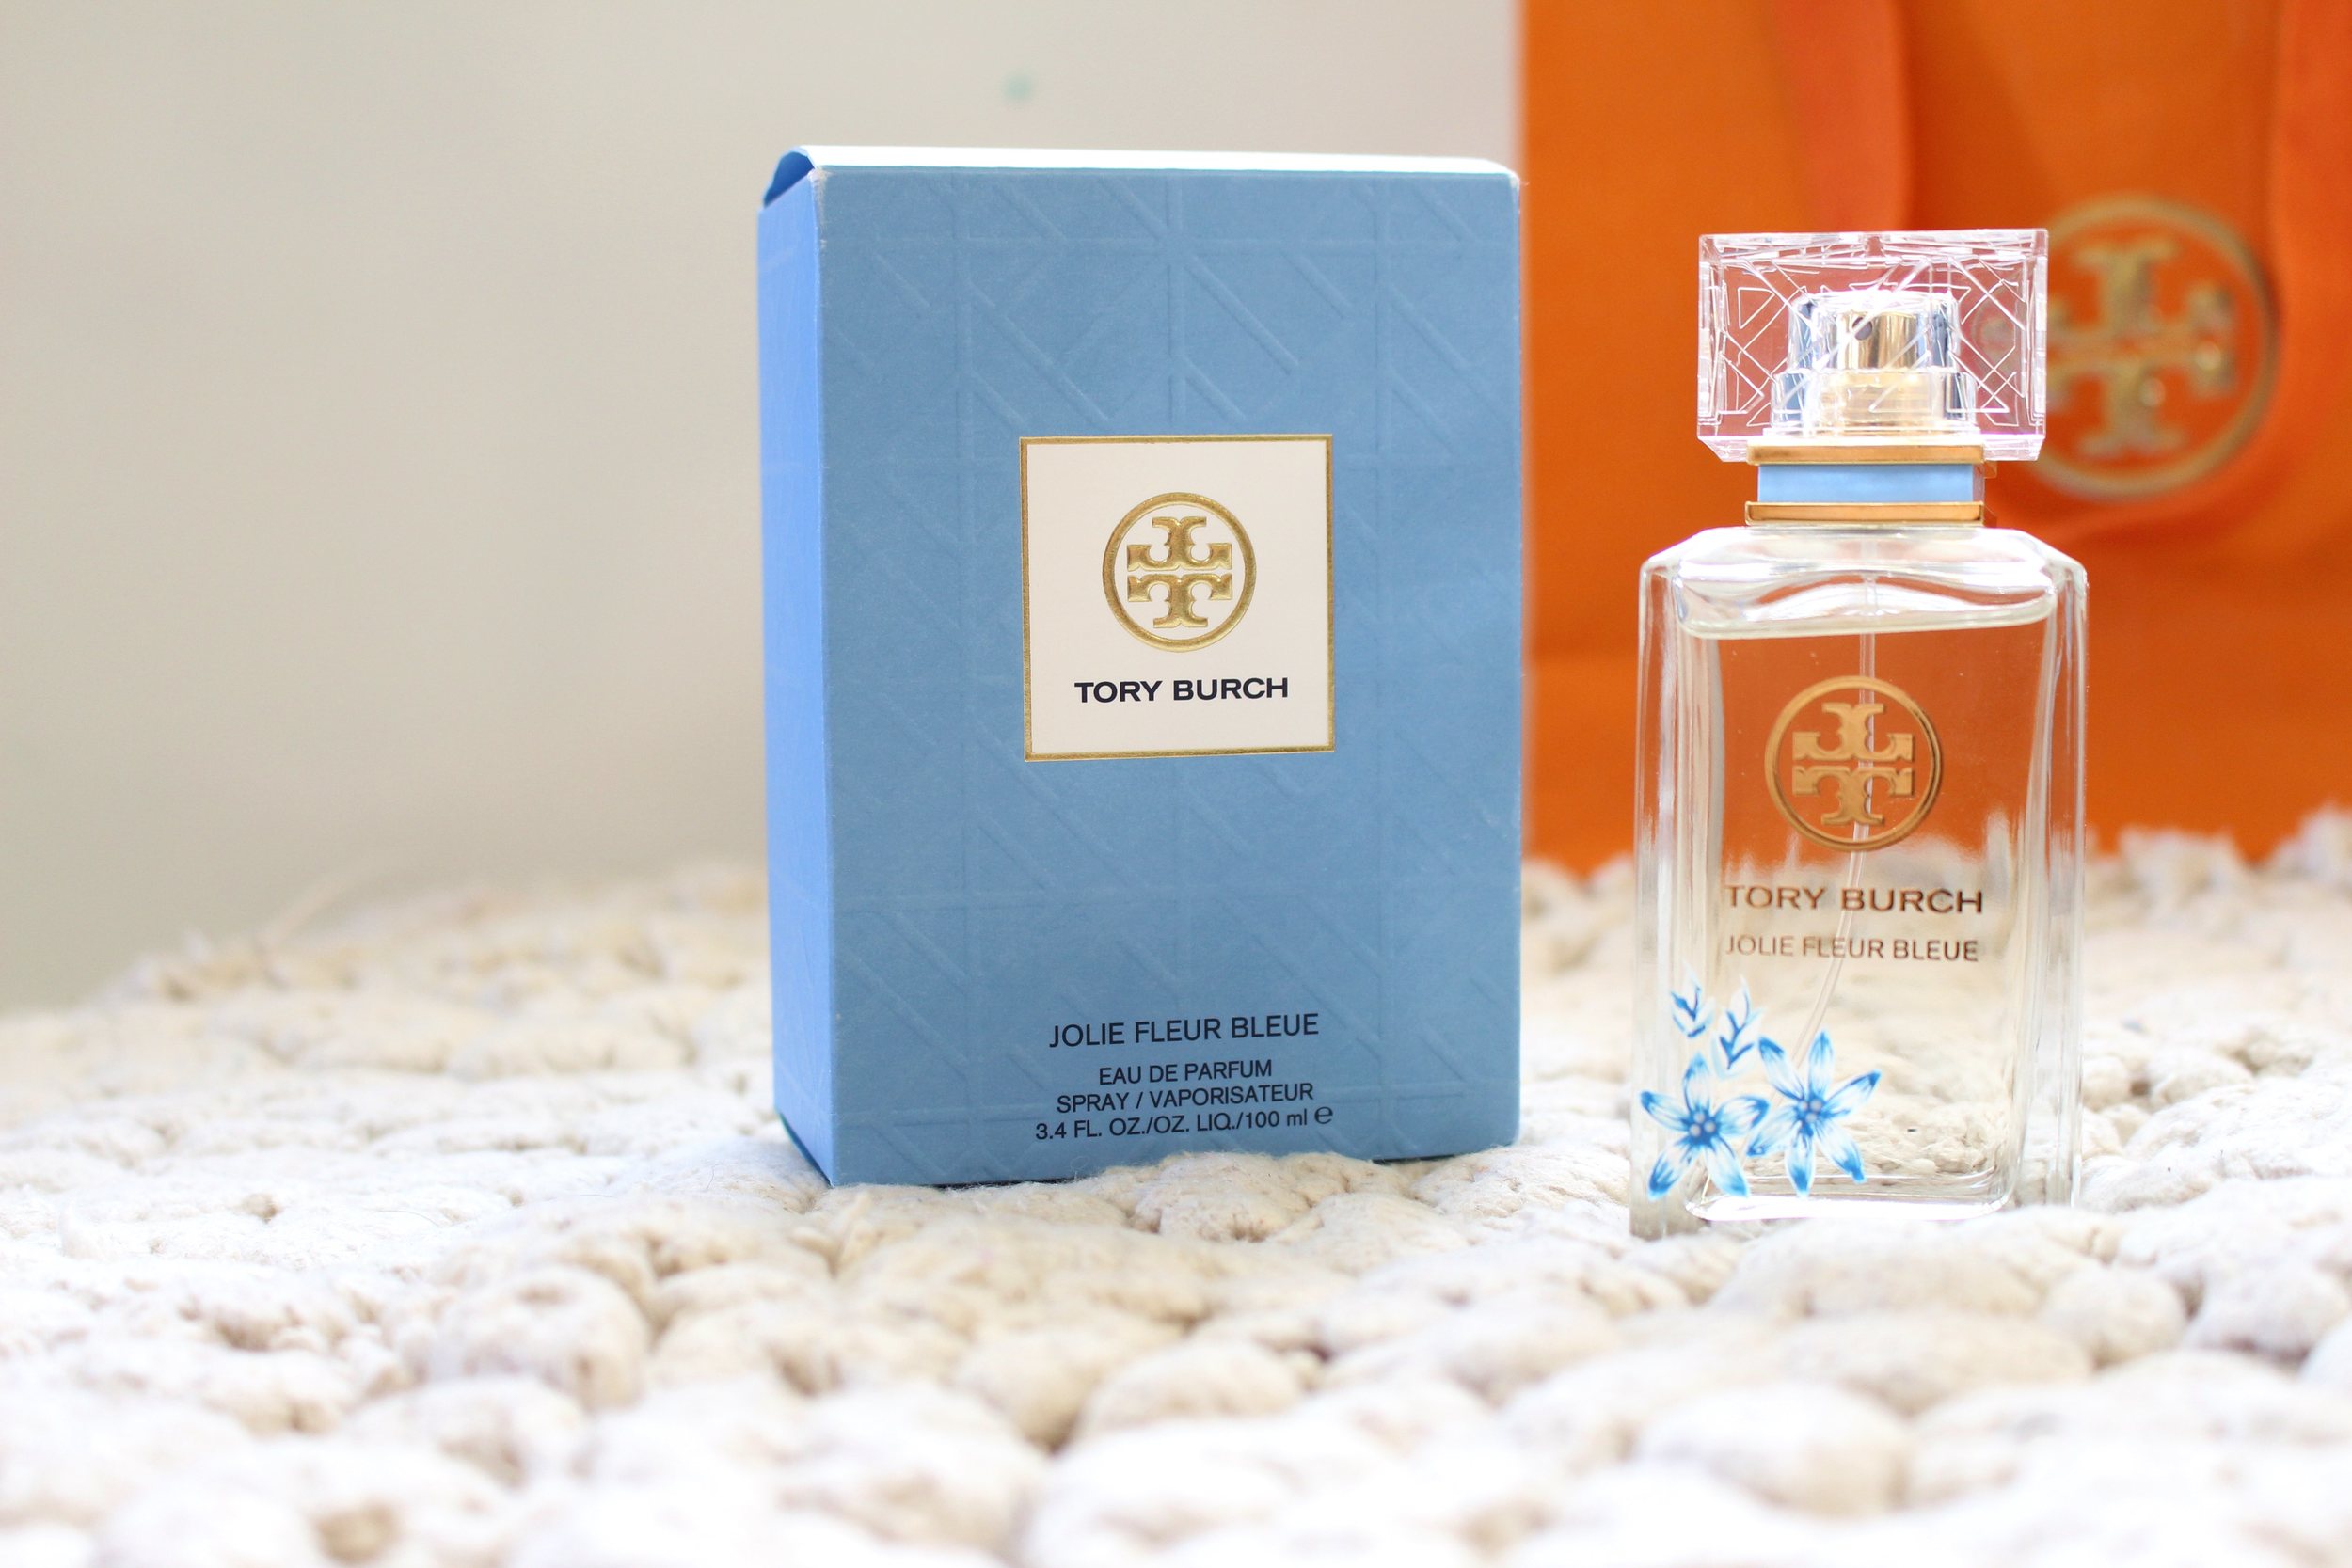 Current go-to scent: The Tory Burch Jolie Fleur Bleue — Project Vanity